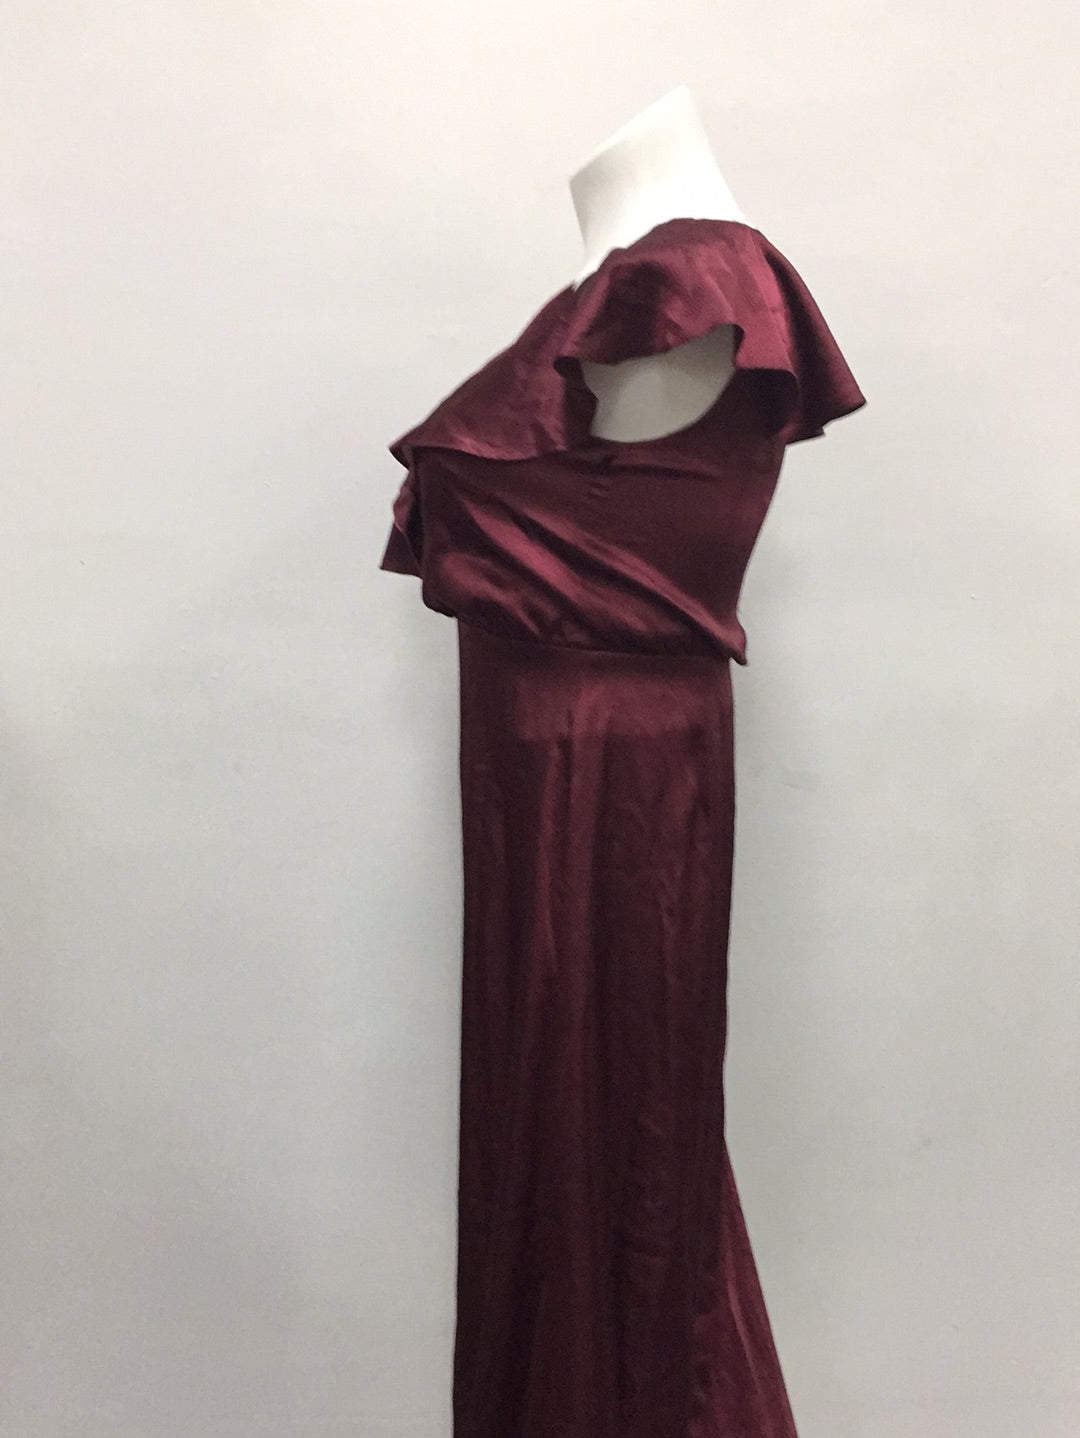 ADRIANNA PAPELL SILKY FLUTTER SLEEVE EVENING DRESS BURGUNDY 8 - NEW WITHOUT TAG 6063